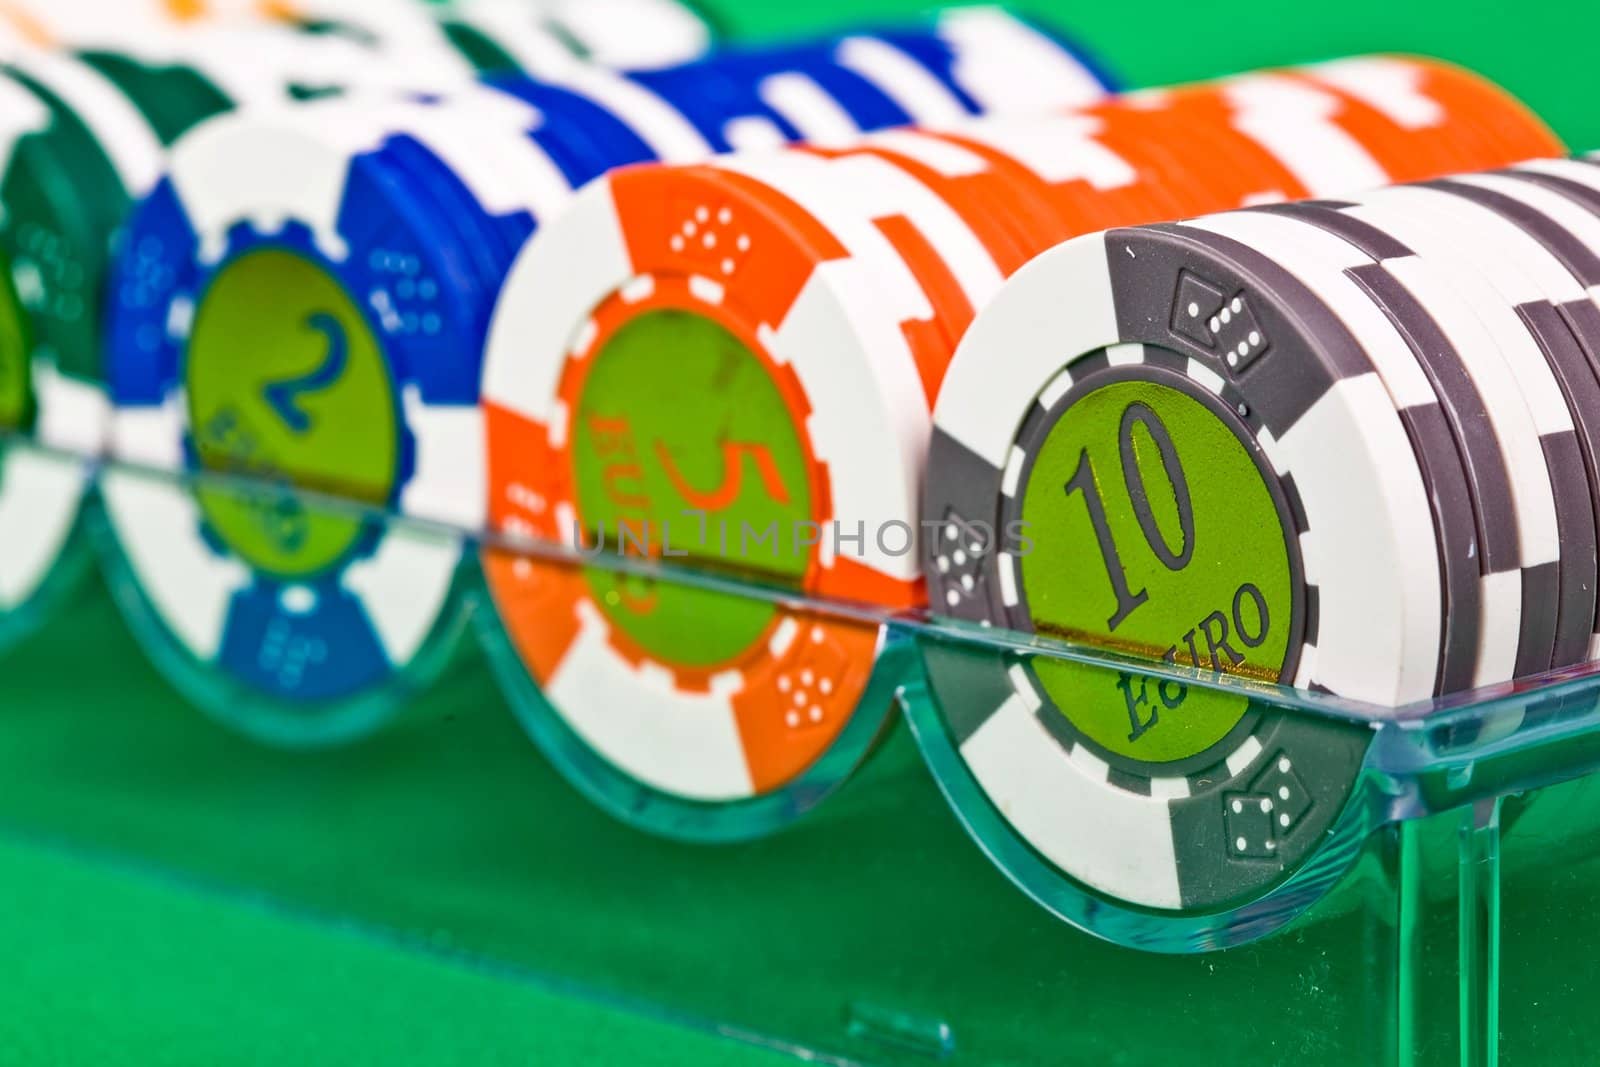 An image of poker chips in plastic box